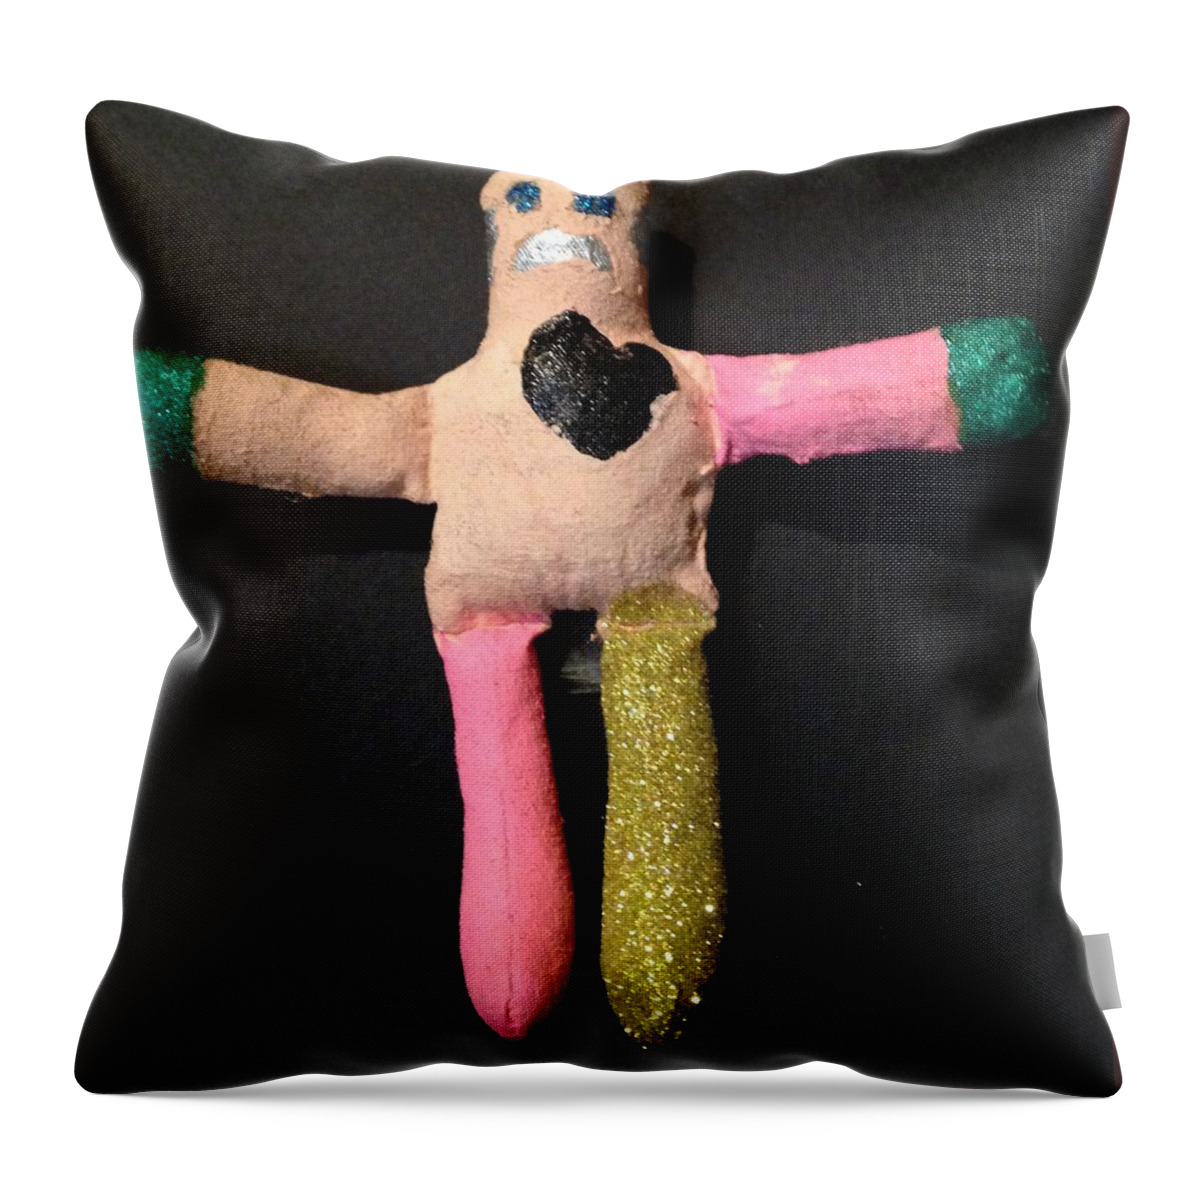 Effigy Throw Pillow featuring the sculpture Effigy One by Erika Jean Chamberlin